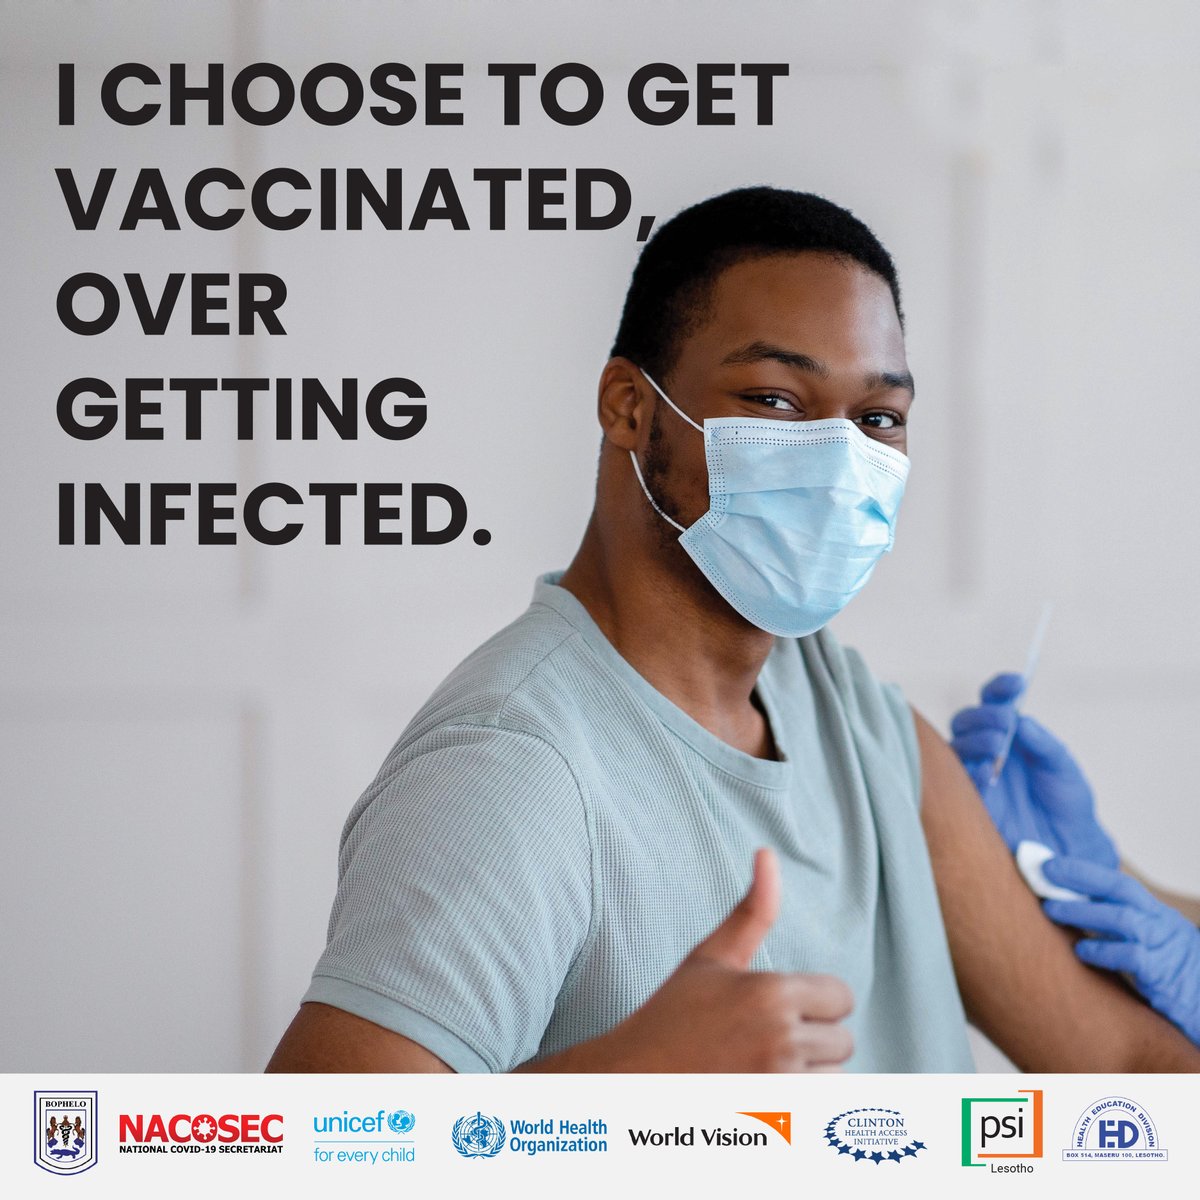 Vaccines train our immune system to recognize the targeted virus and create antibodies to fight off the disease. After vaccination, the body is ready to fight the virus if it is later exposed to it, thereby preventing illness. #COVID19 #Mythbusters #vforvaccinate #vaccinated